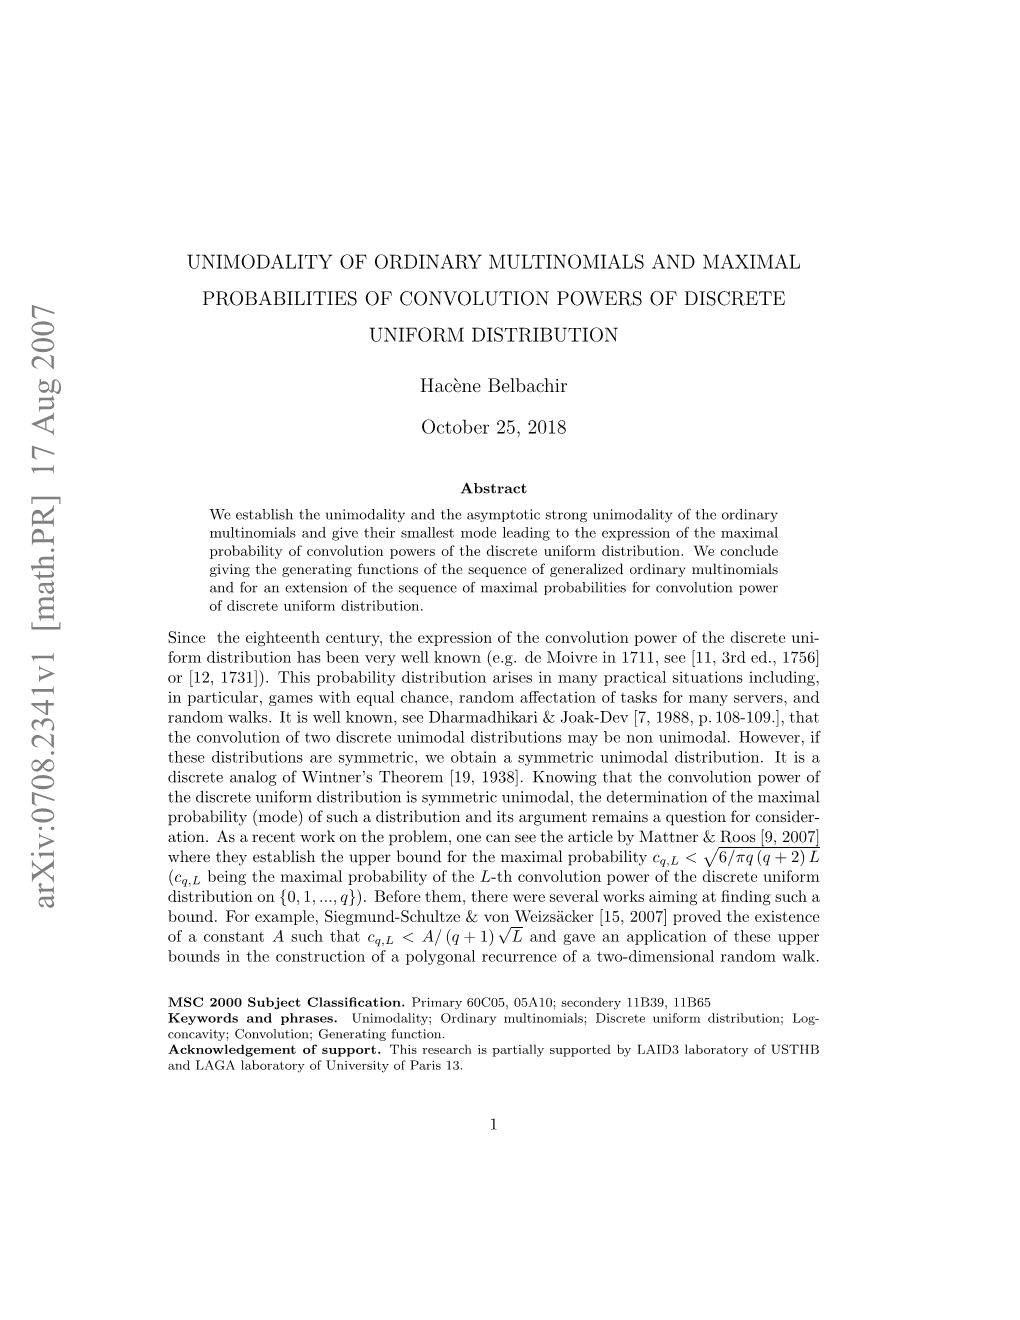 Unimodality of Ordinary Multinomials and Maximal Probabilities Of